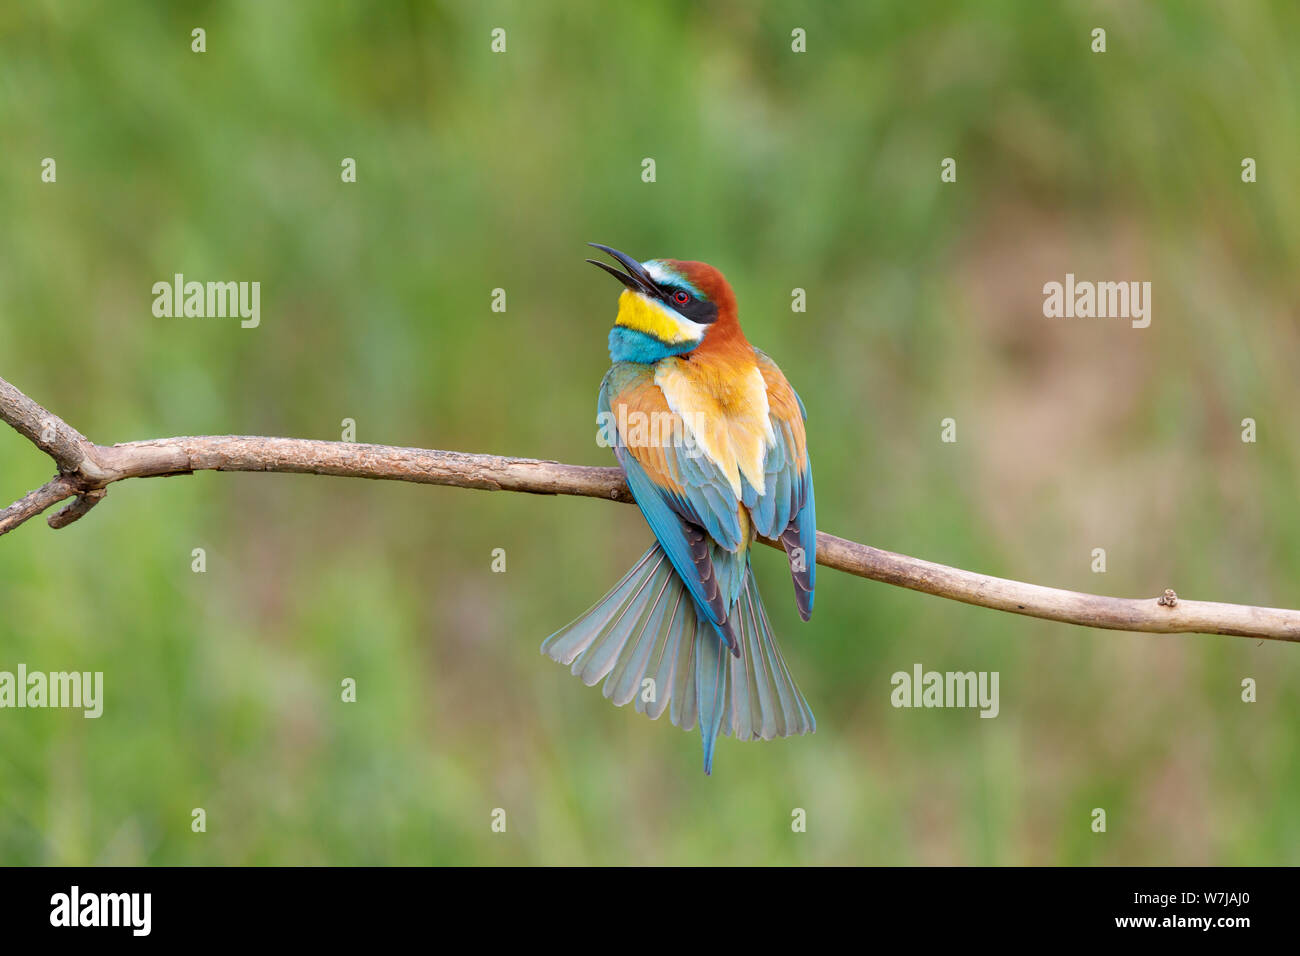 A European bee-eater (Merops apiaster) perches on a branch with an open beak ruffling its feathers, Koros-Maros National Park, Bekes County, Hungary Stock Photo